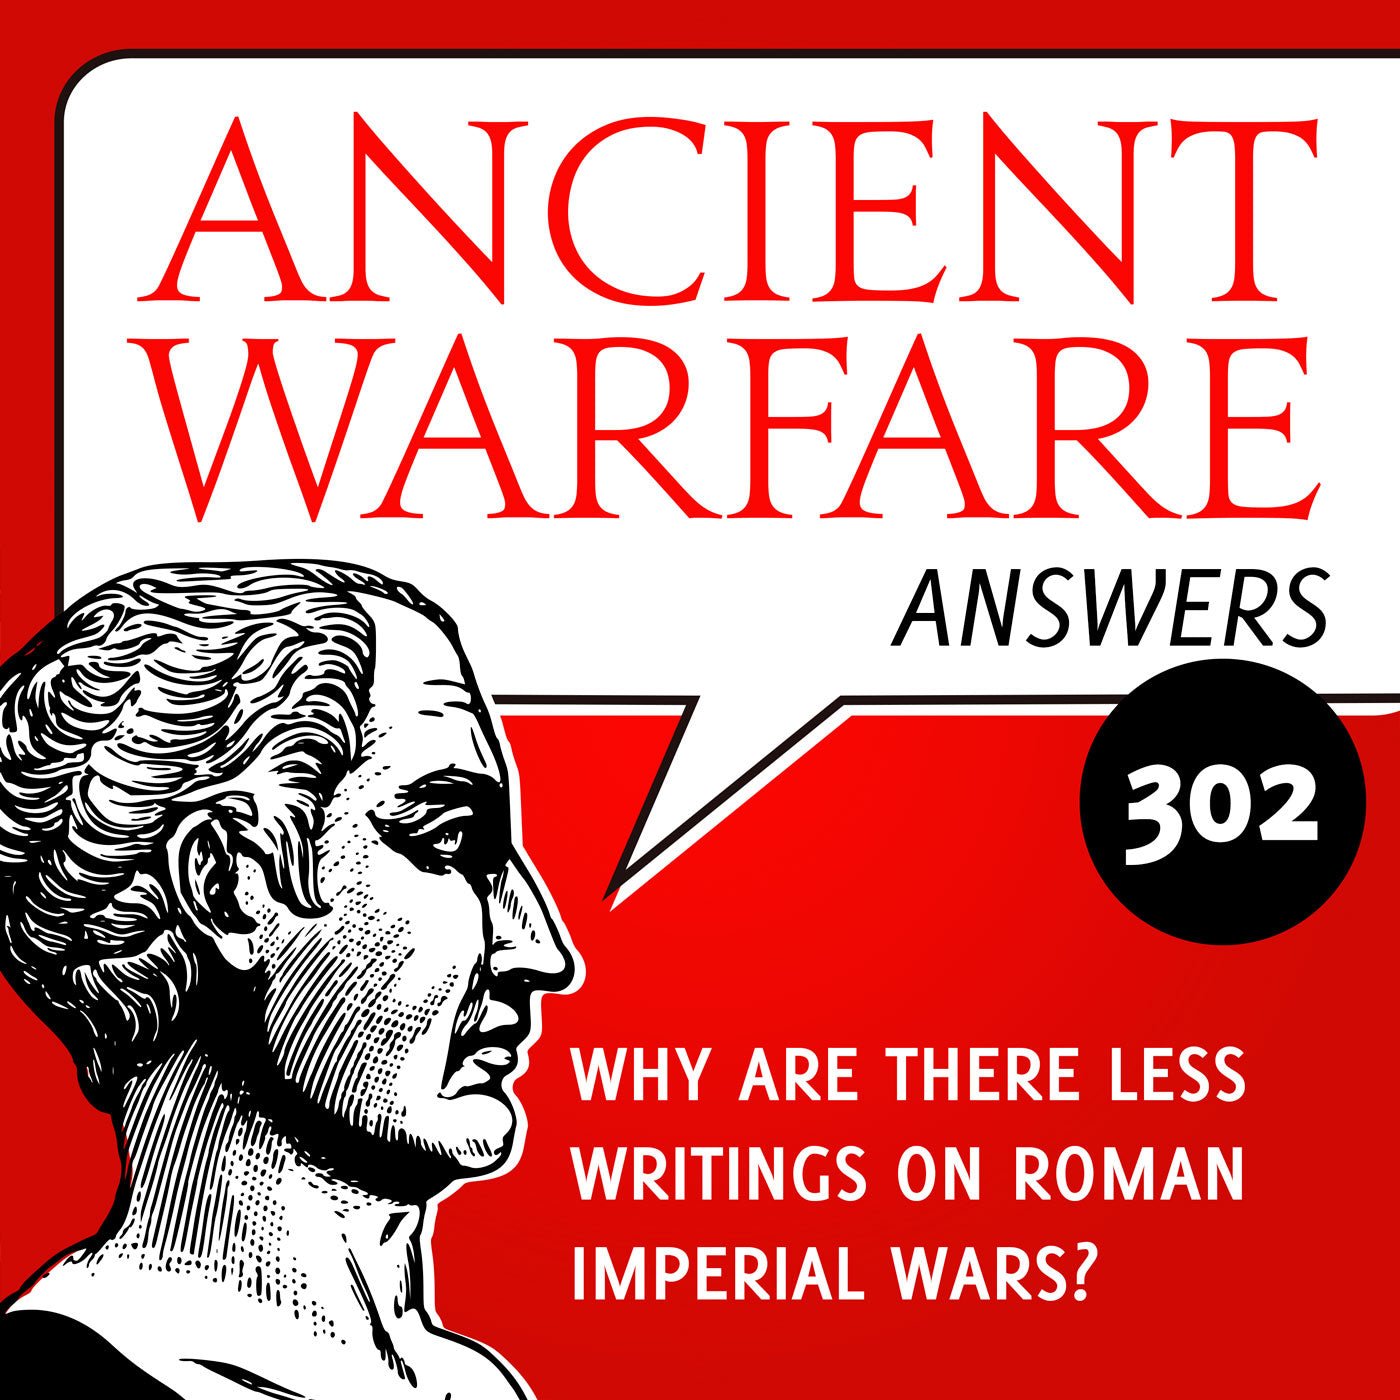 Ancient Warfare Answers (302): Why are there less writings on Roman imperial wars?